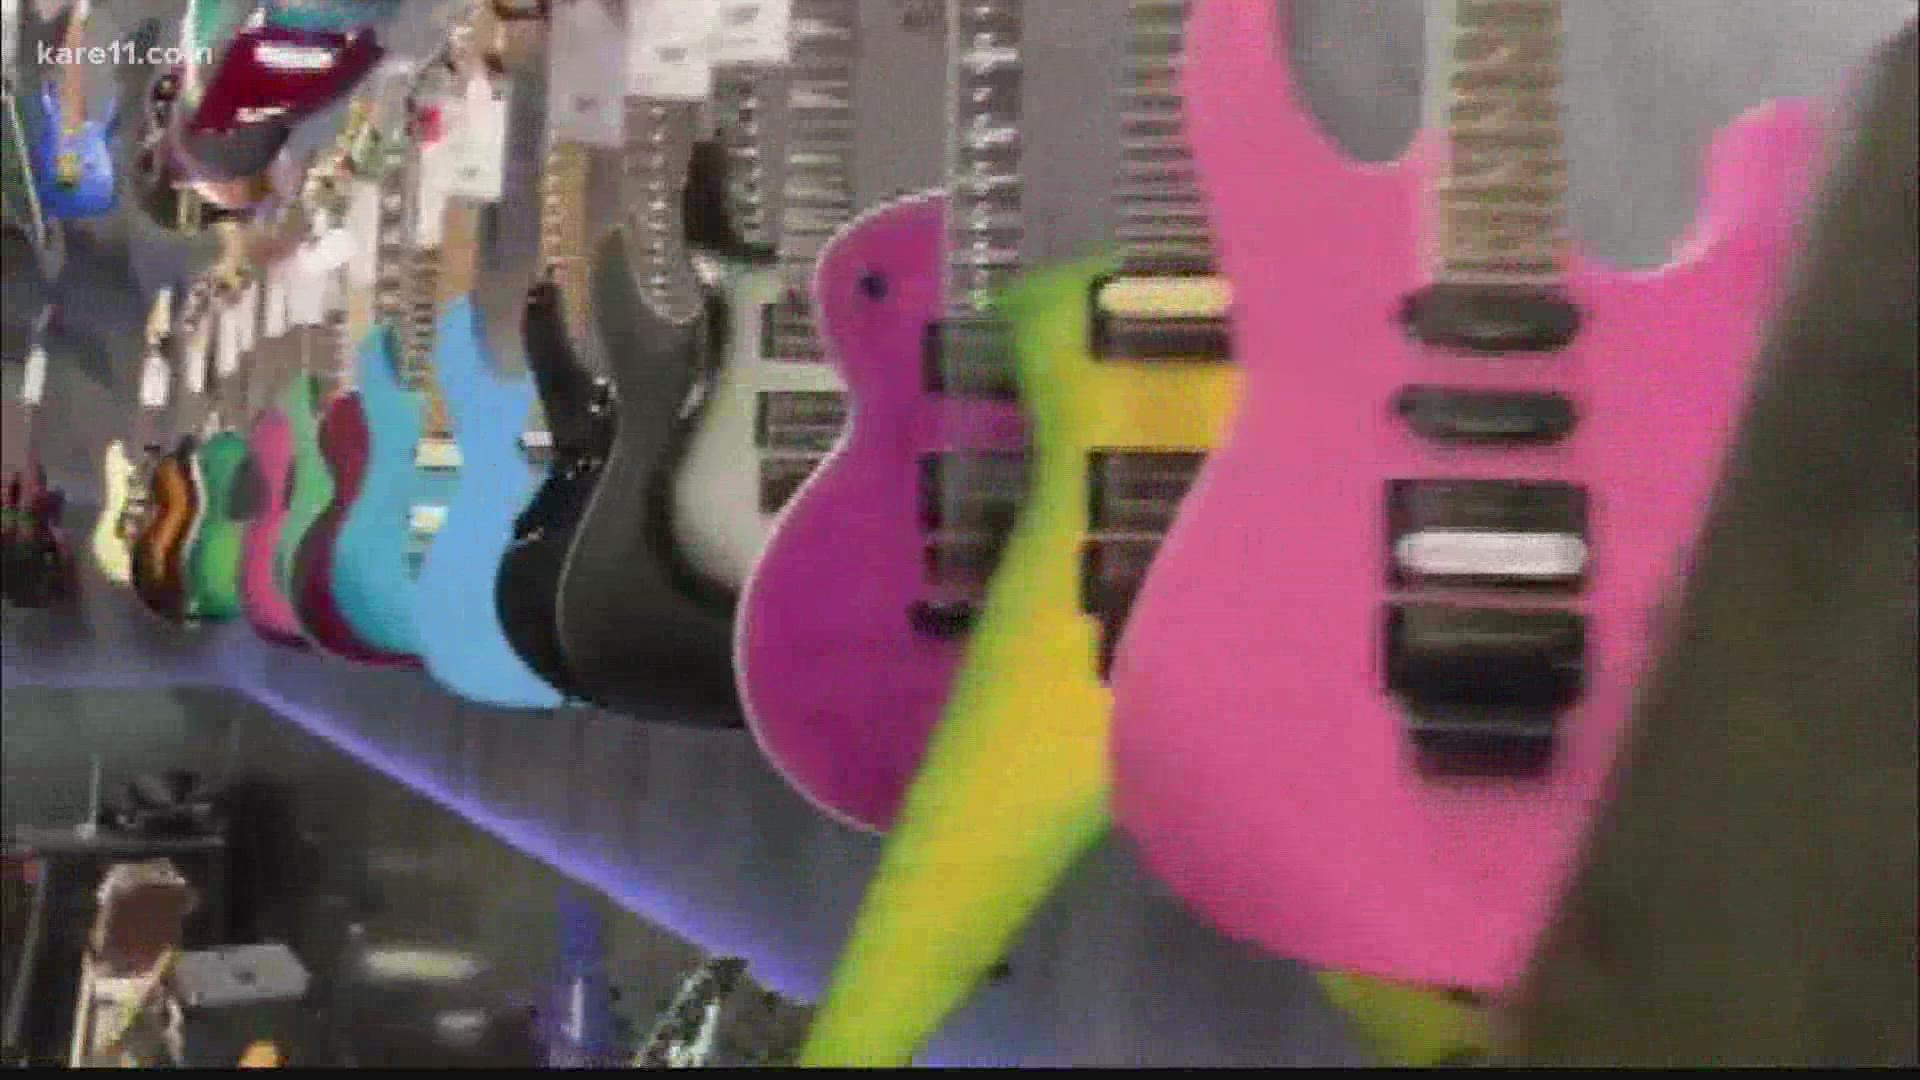 Rock stars aren't born, they're made, and Free Guitars 4 Kids wants to be the instrument for a child's success.